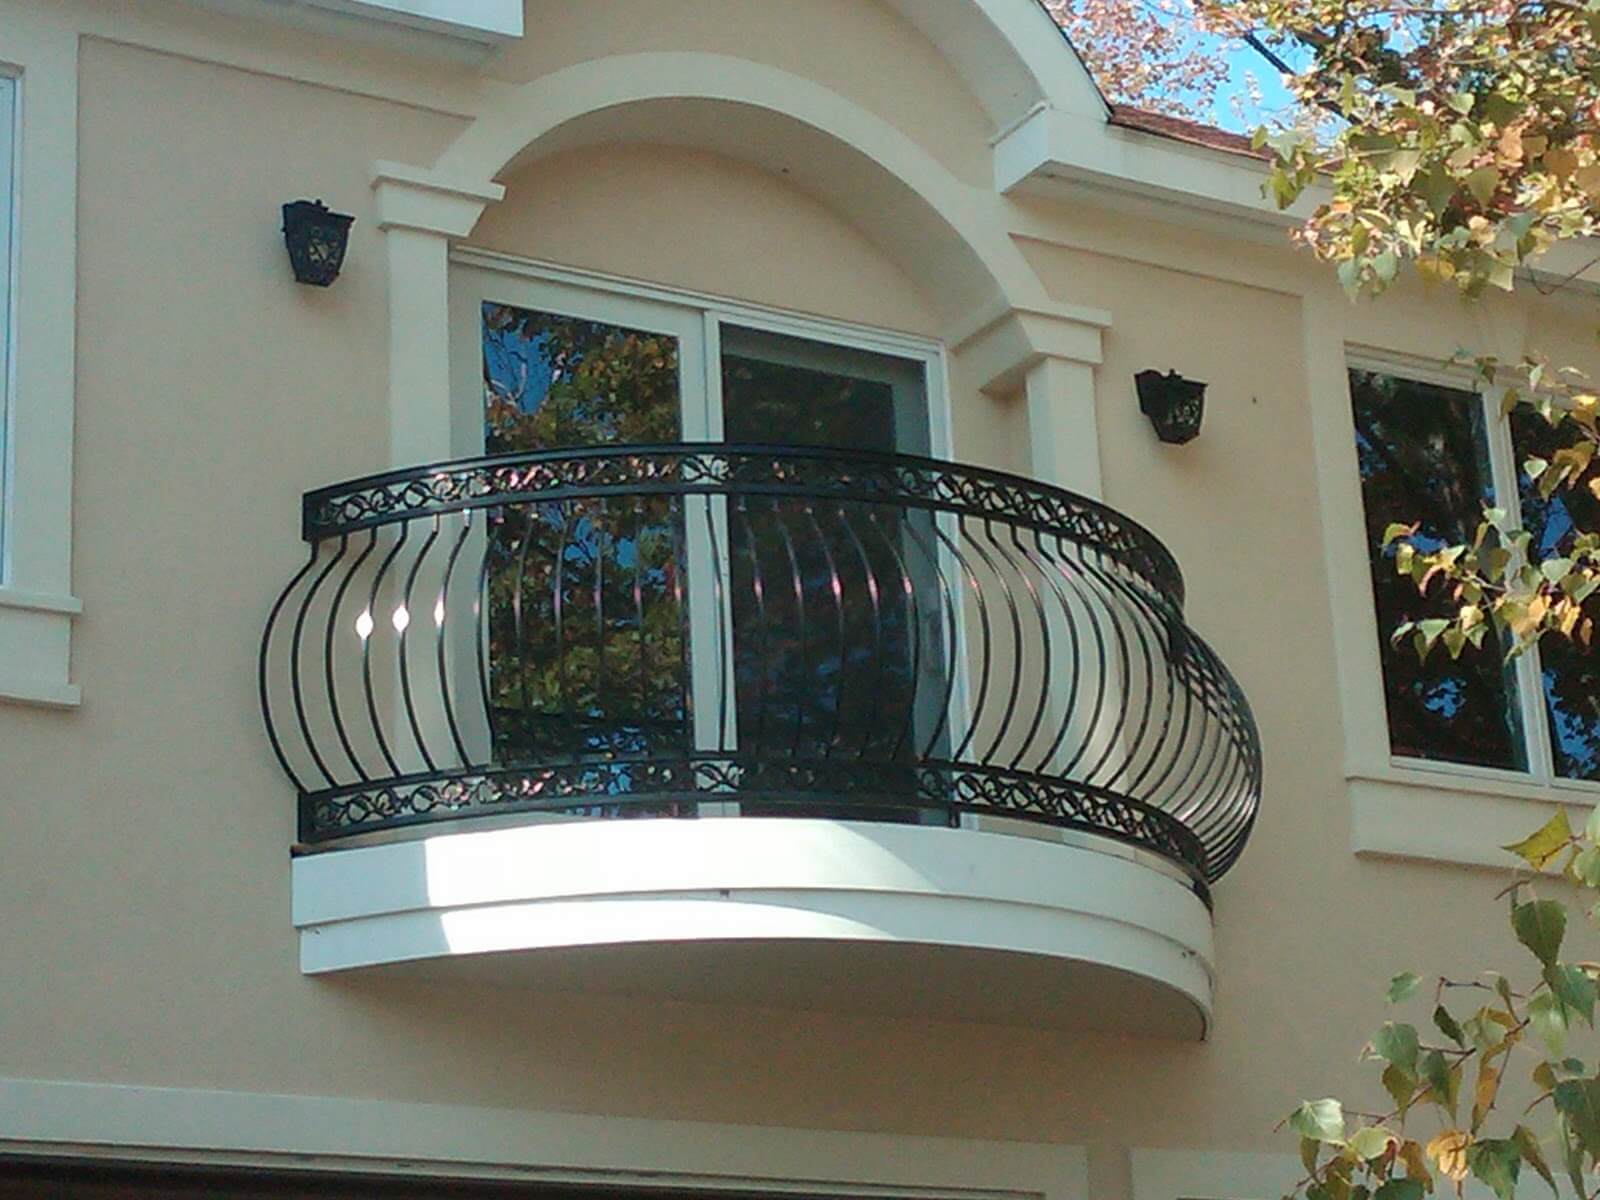 Round Balcony Design For House - Image Balcony and Attic ...